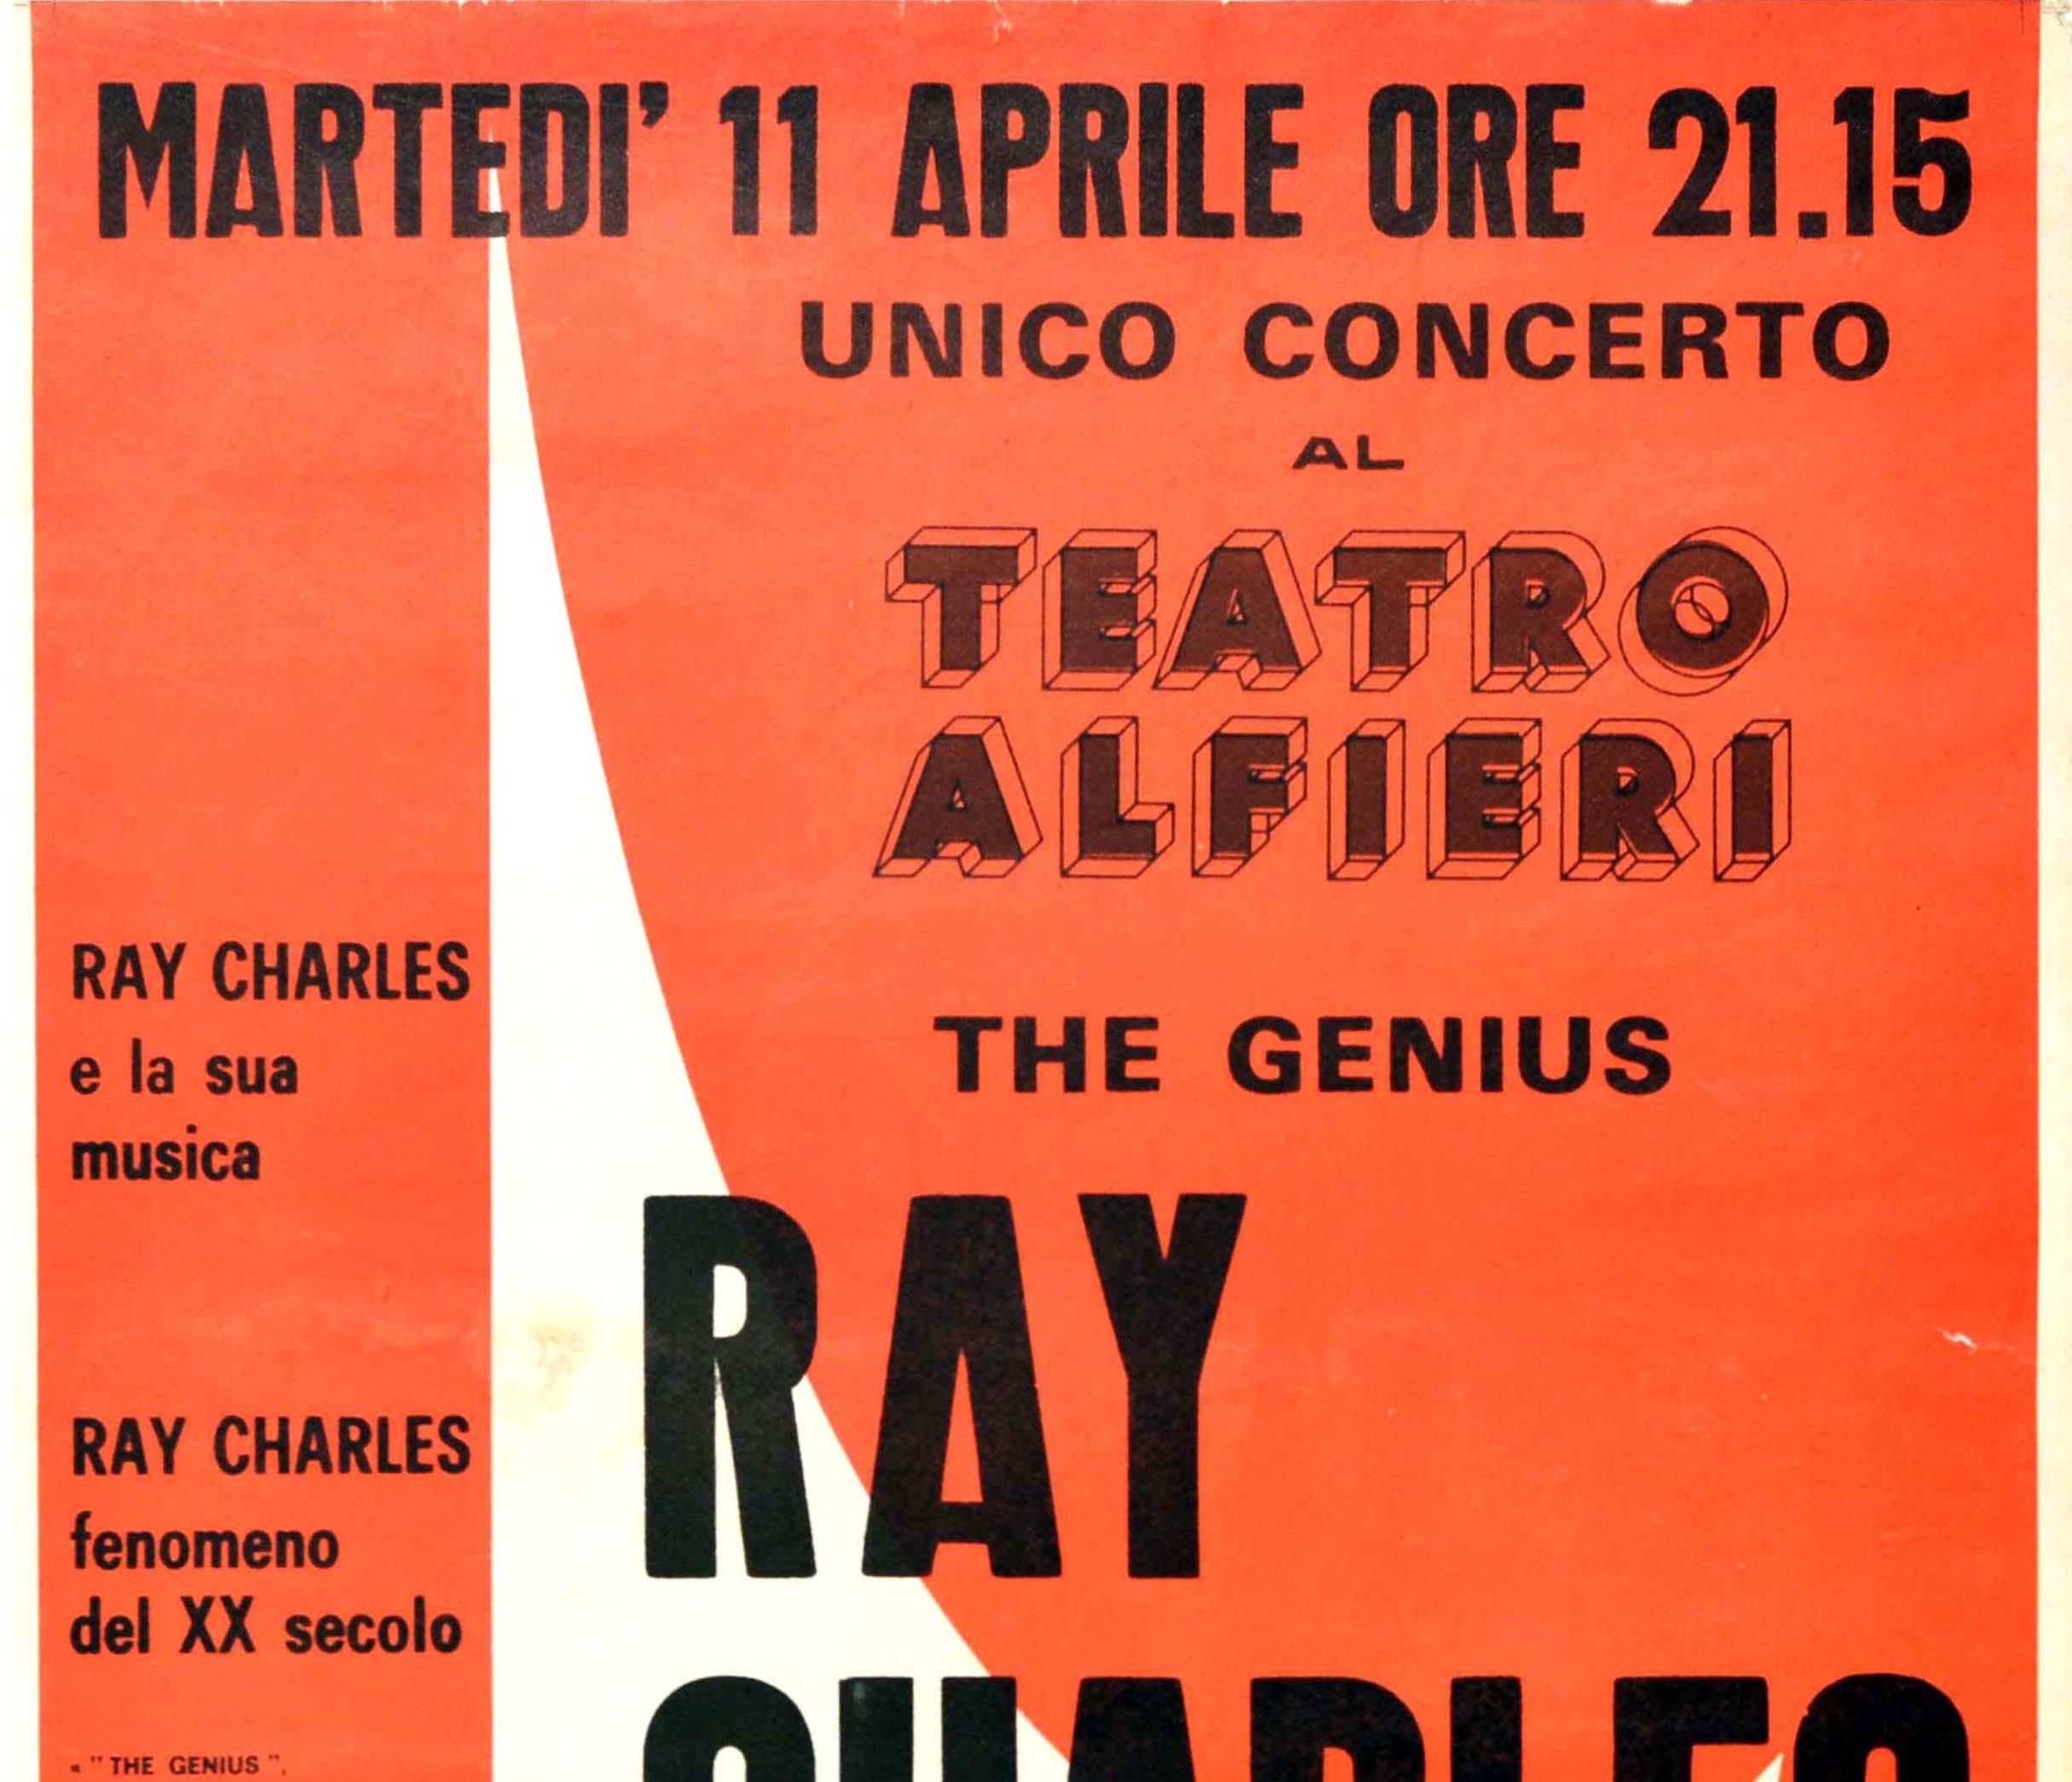 Original vintage poster advertising a music concert performance by the notable American singer and musician Ray Charles (Ray Charles Robinson; 1930-2004) The Genius presented by Francesco Sanavio at the Teatro Alfieri in Turin Italy on Tuesday 11